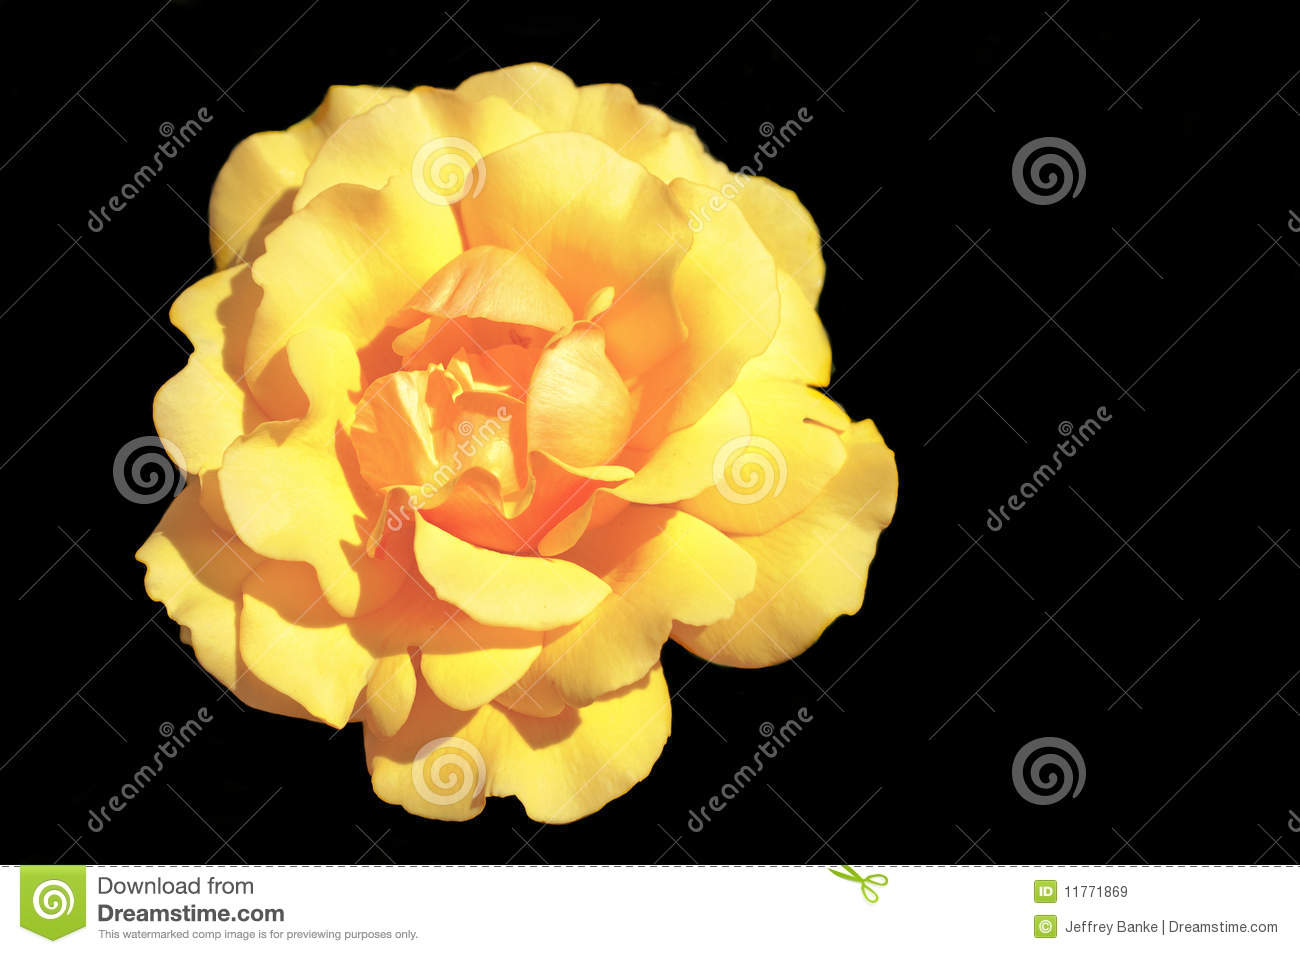 Yellow Rose Of The Grandiflora Variety On A Black Background